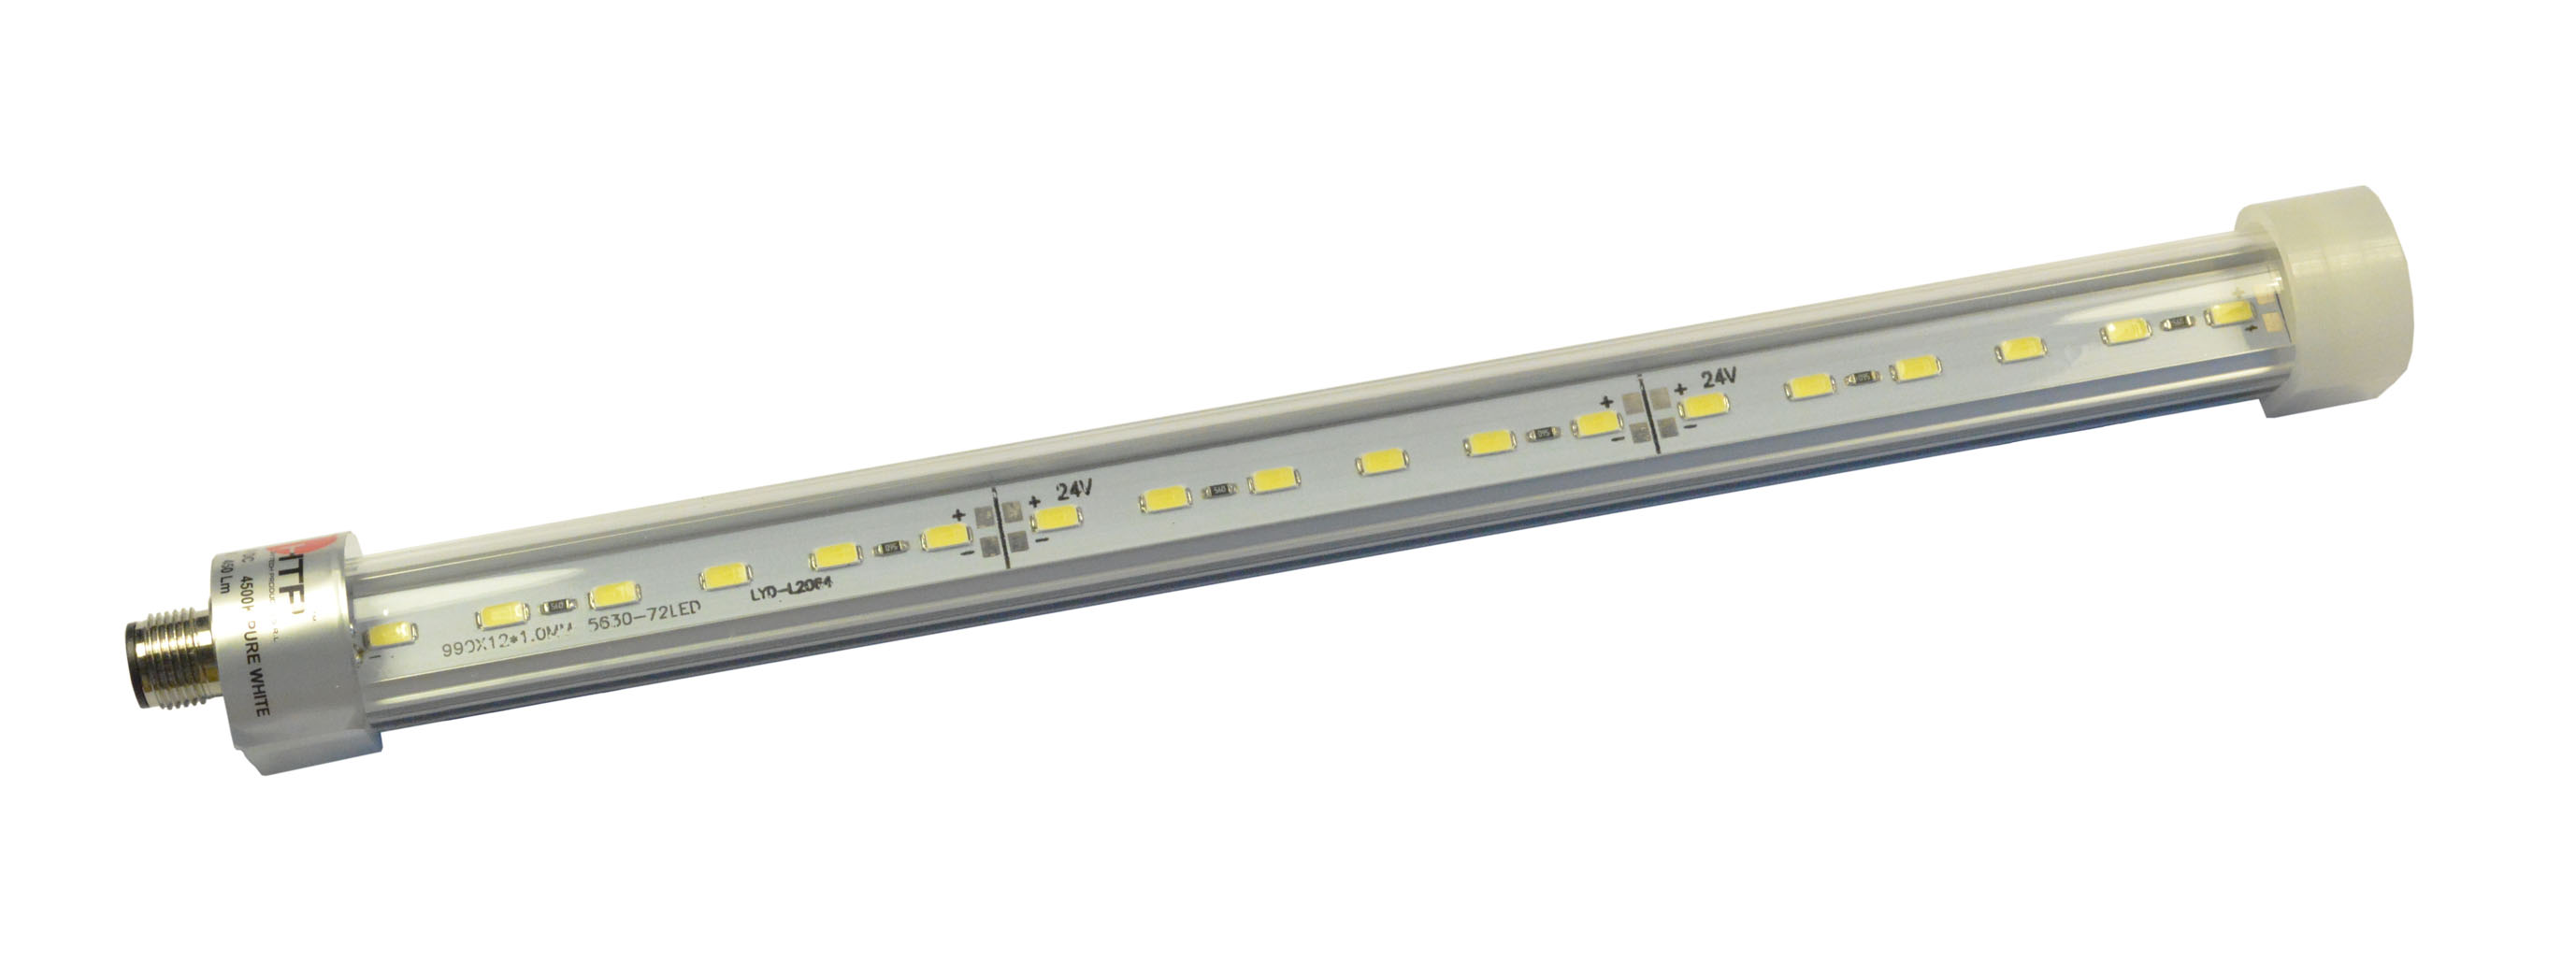 Industrial lighting,0,5m,24VDC,7,7W,4500K pure white,450 lm,M12 male,IP54